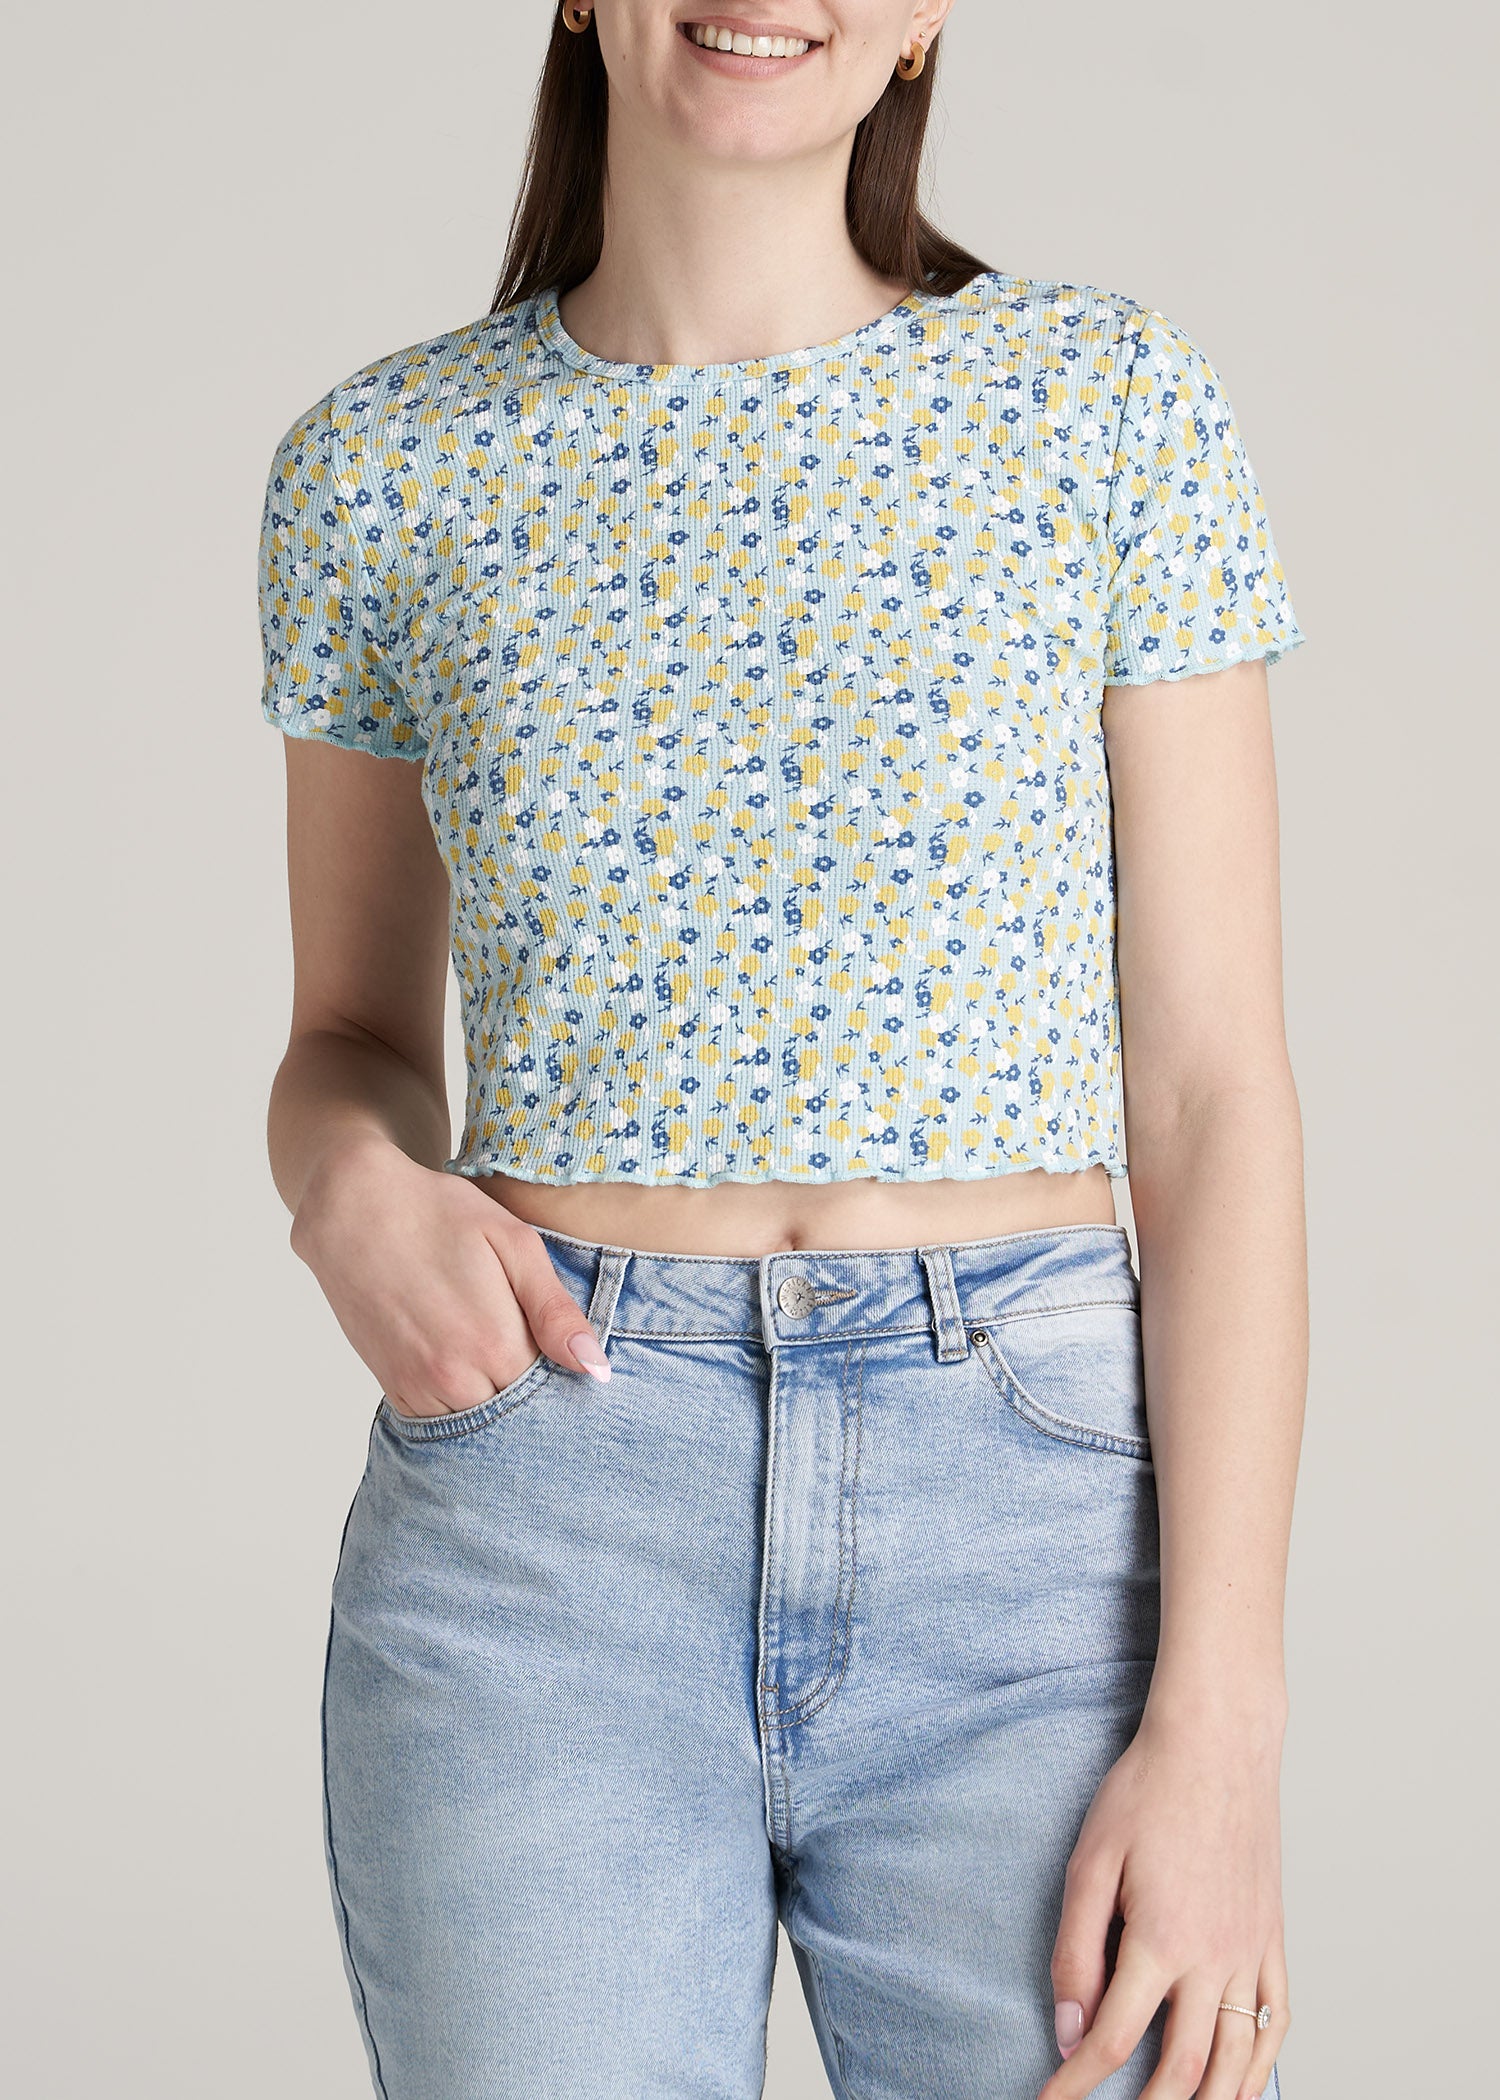 Women's Cropped Waffle Tee Blue Floral | American